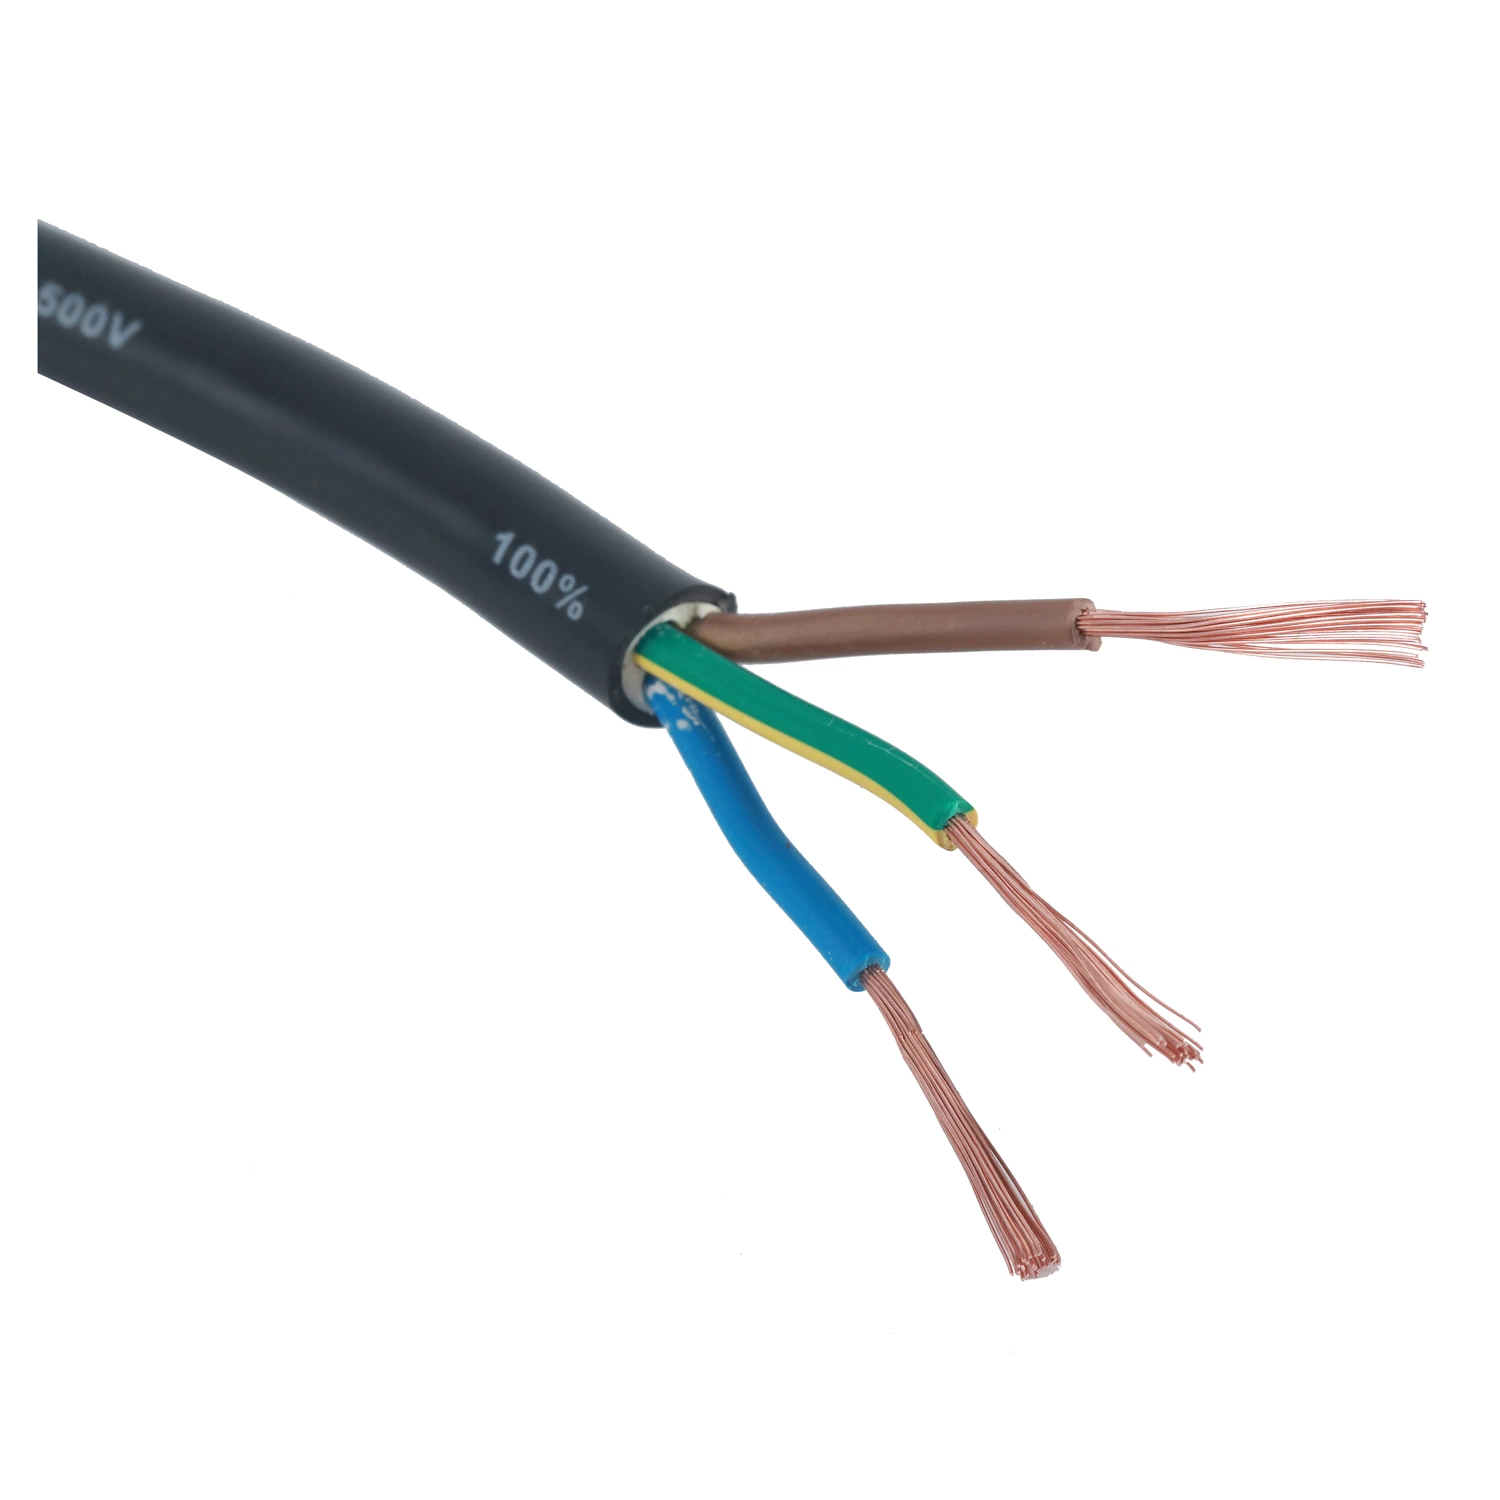 H07rn-F 5X16 H07rn-F 5X2 5 H07rn-F 5X4 mm2 H07rn-F 5X6 0 H07rn-F 5X6mm2 Cable